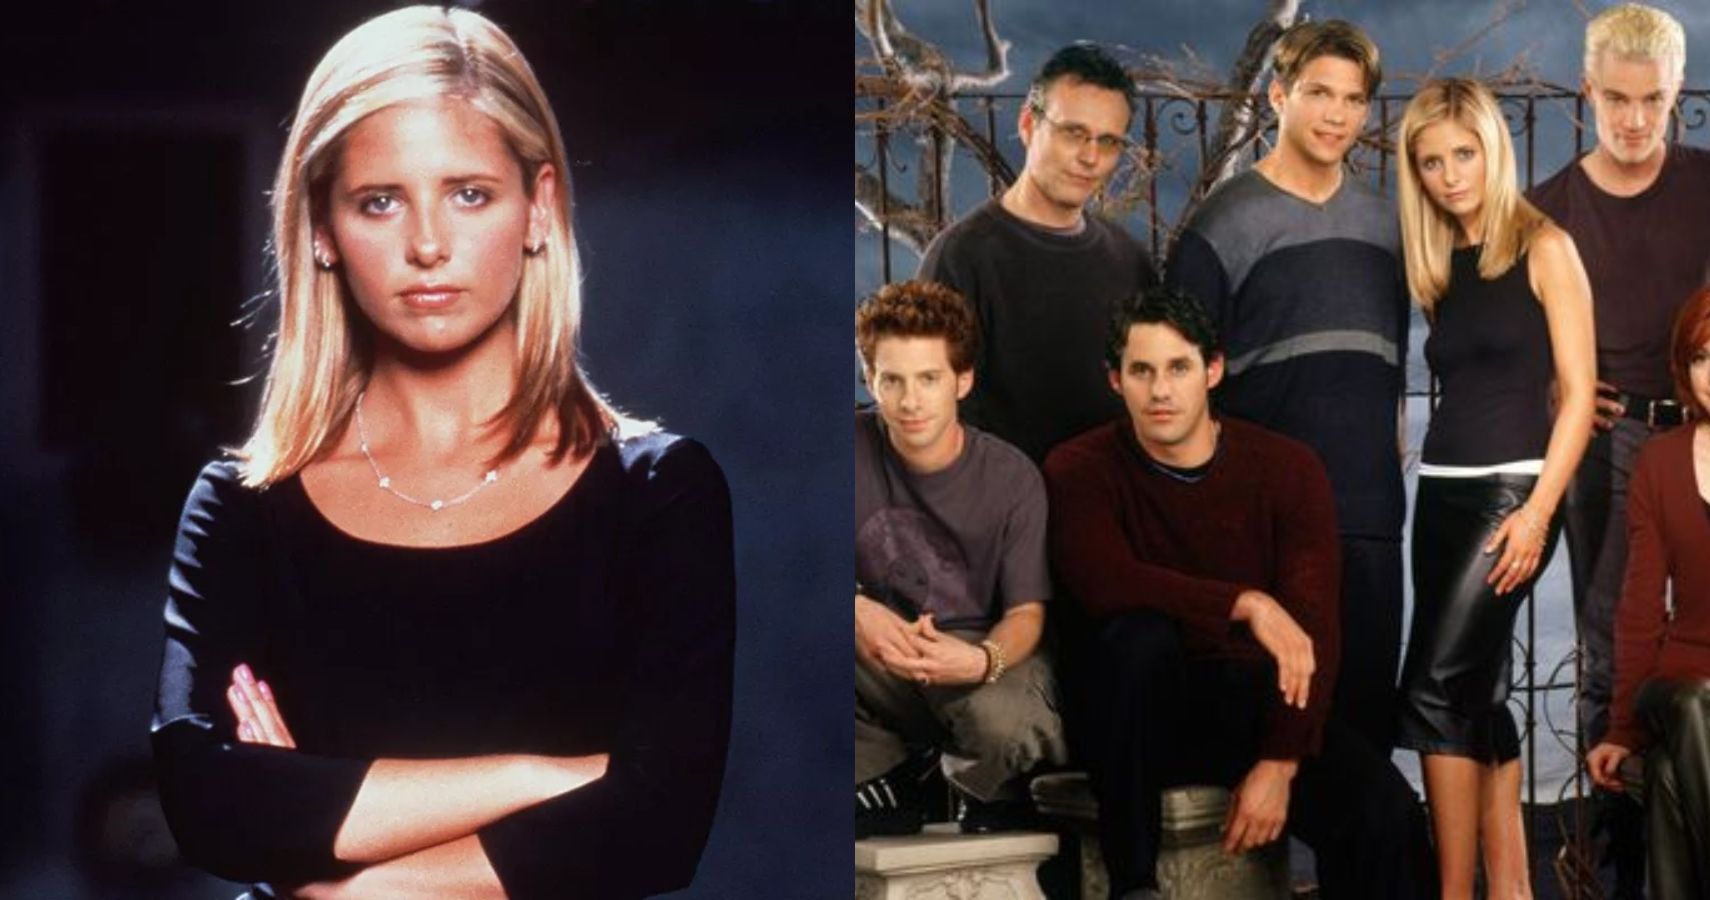 Buffy The Vampire Slayer 10 Storylines That Have Aged Poorly